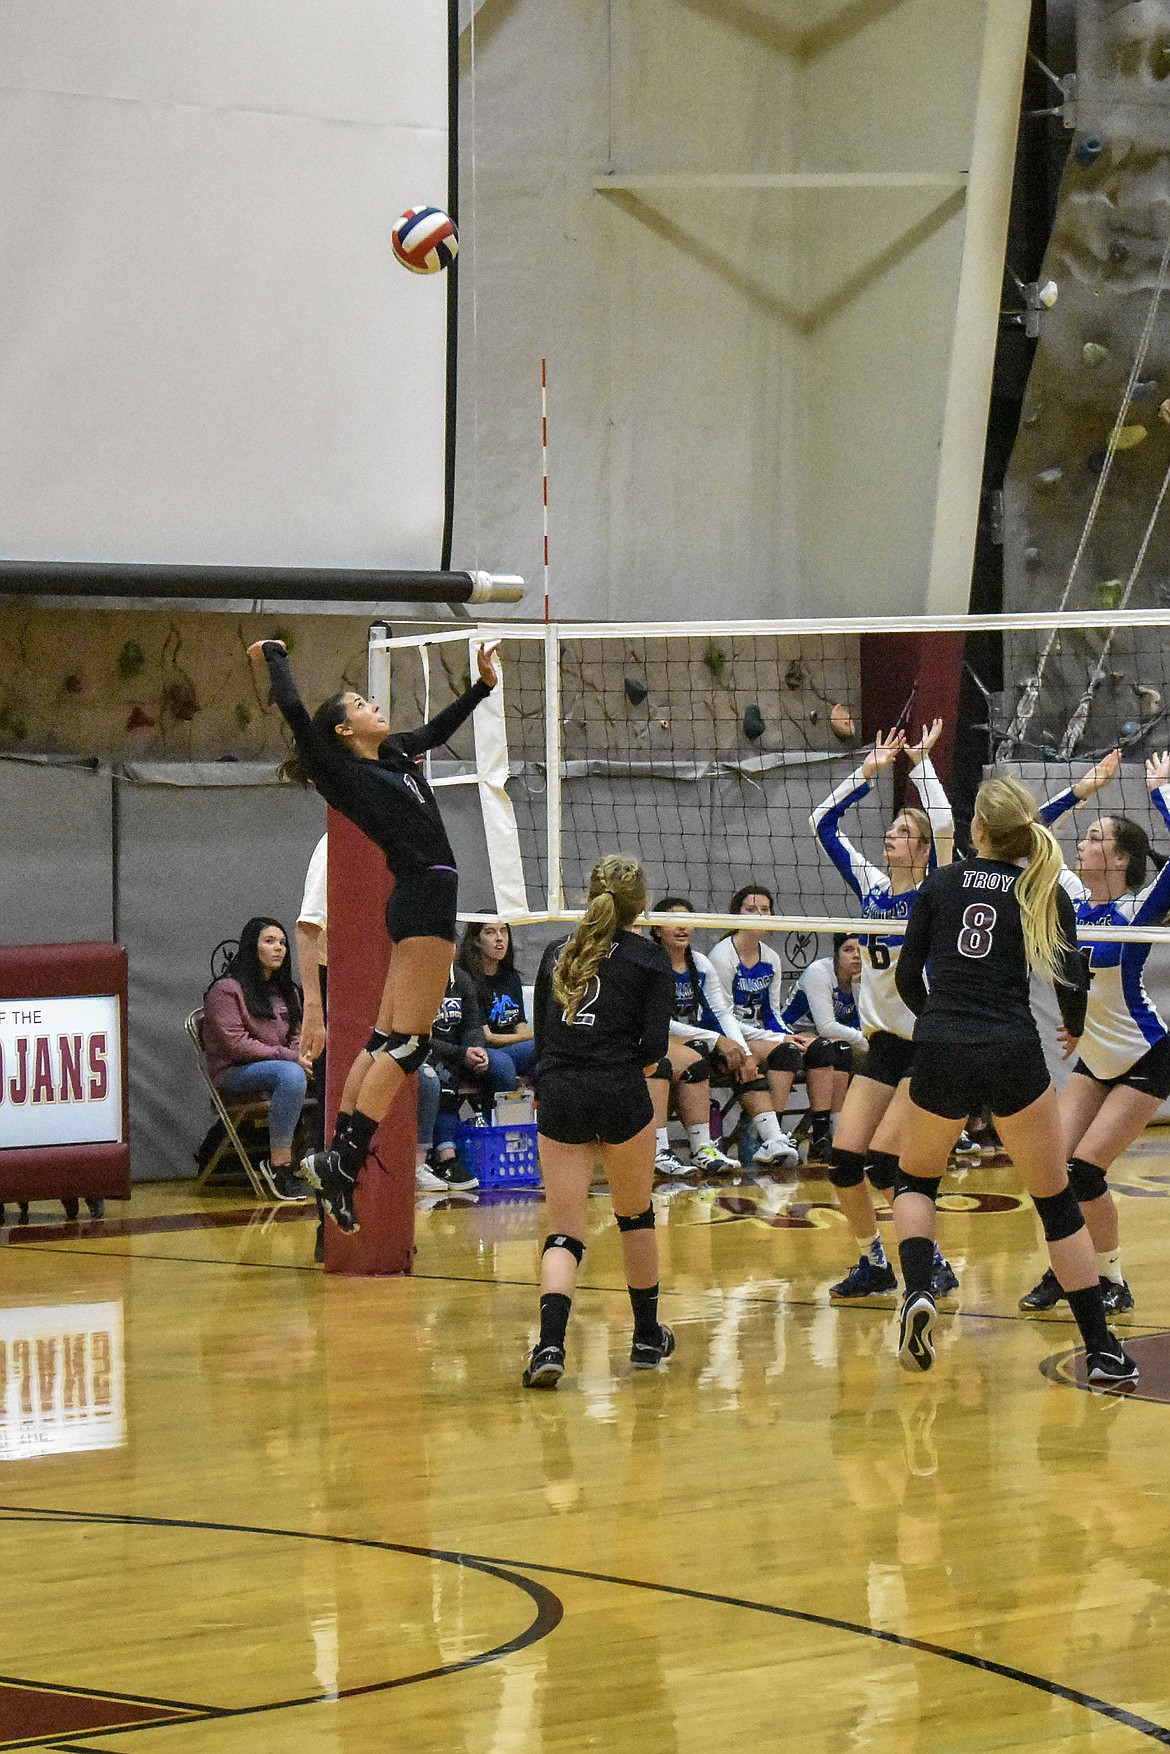 Troy sophomore Talise Bequart goes up for a kill to start off a 5 point run as the Lady Trojans fought to come back late in the third set against Mission Saturday. (Ben Kibbey/The Western News)